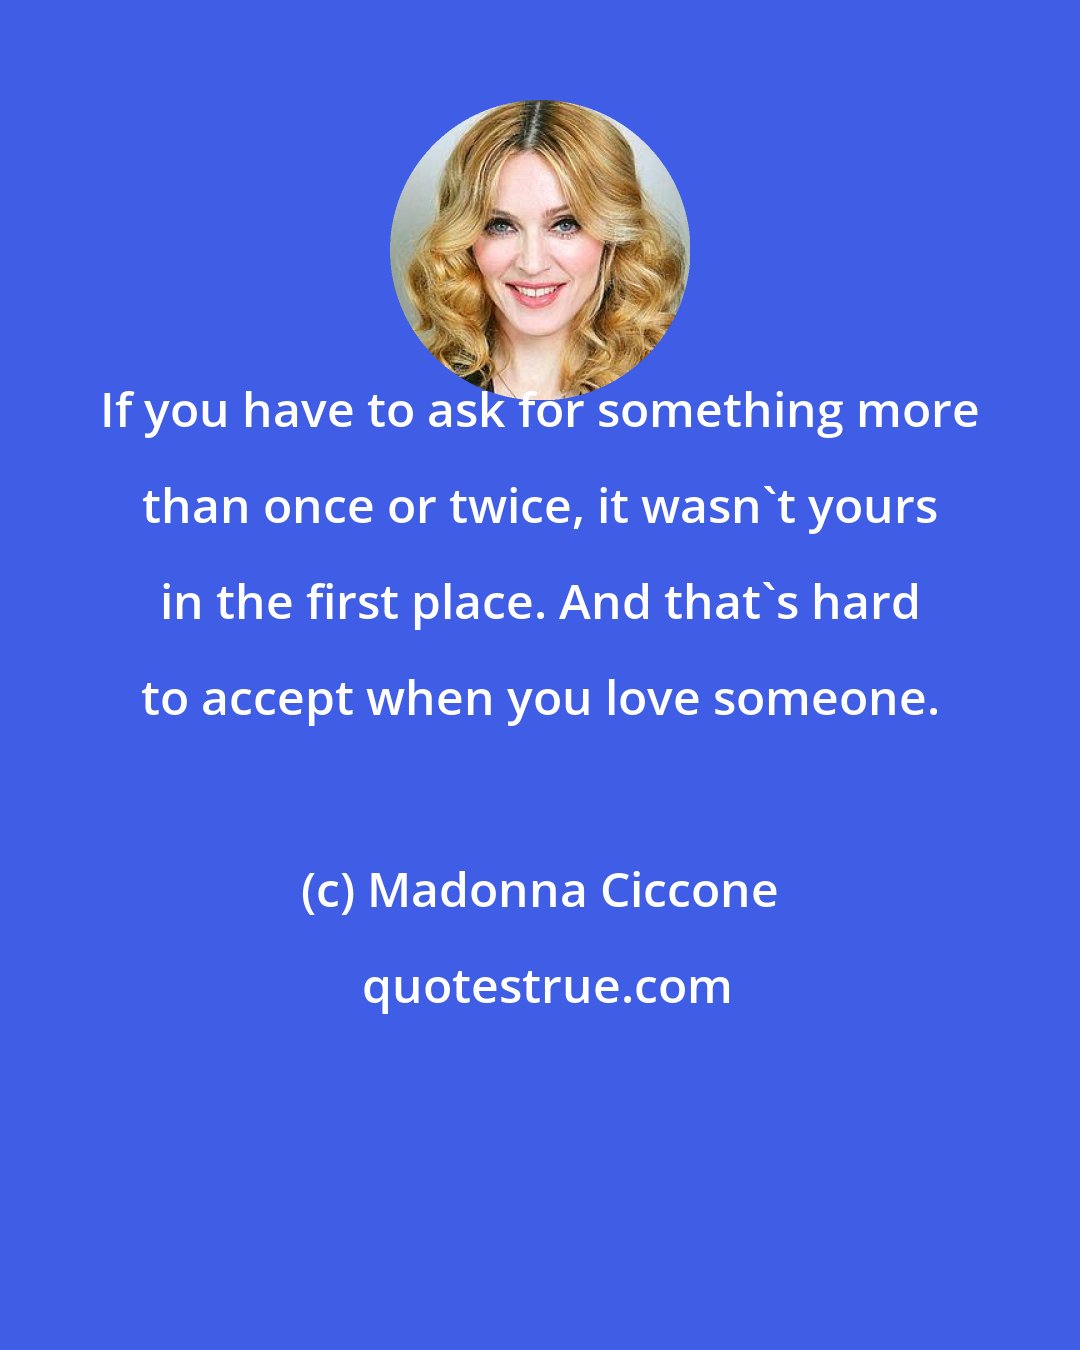 Madonna Ciccone: If you have to ask for something more than once or twice, it wasn't yours in the first place. And that's hard to accept when you love someone.